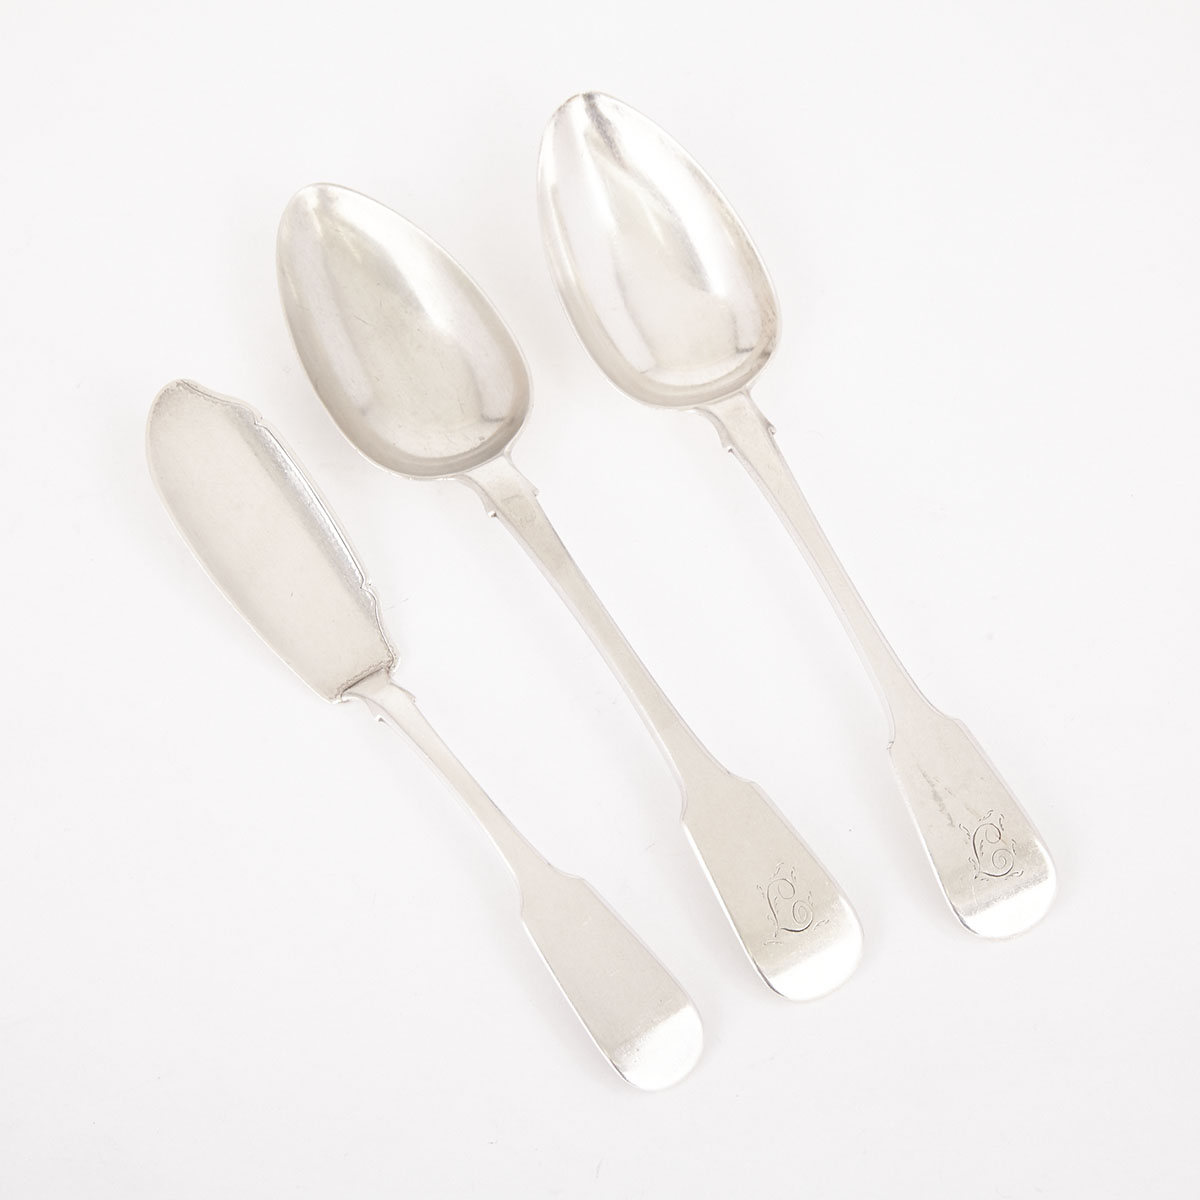 Pair of Canadian Silver Fiddle Pattern Table Spoons and a Butter Knife, Laurent Amiot, Quebec City, Que., c.1820